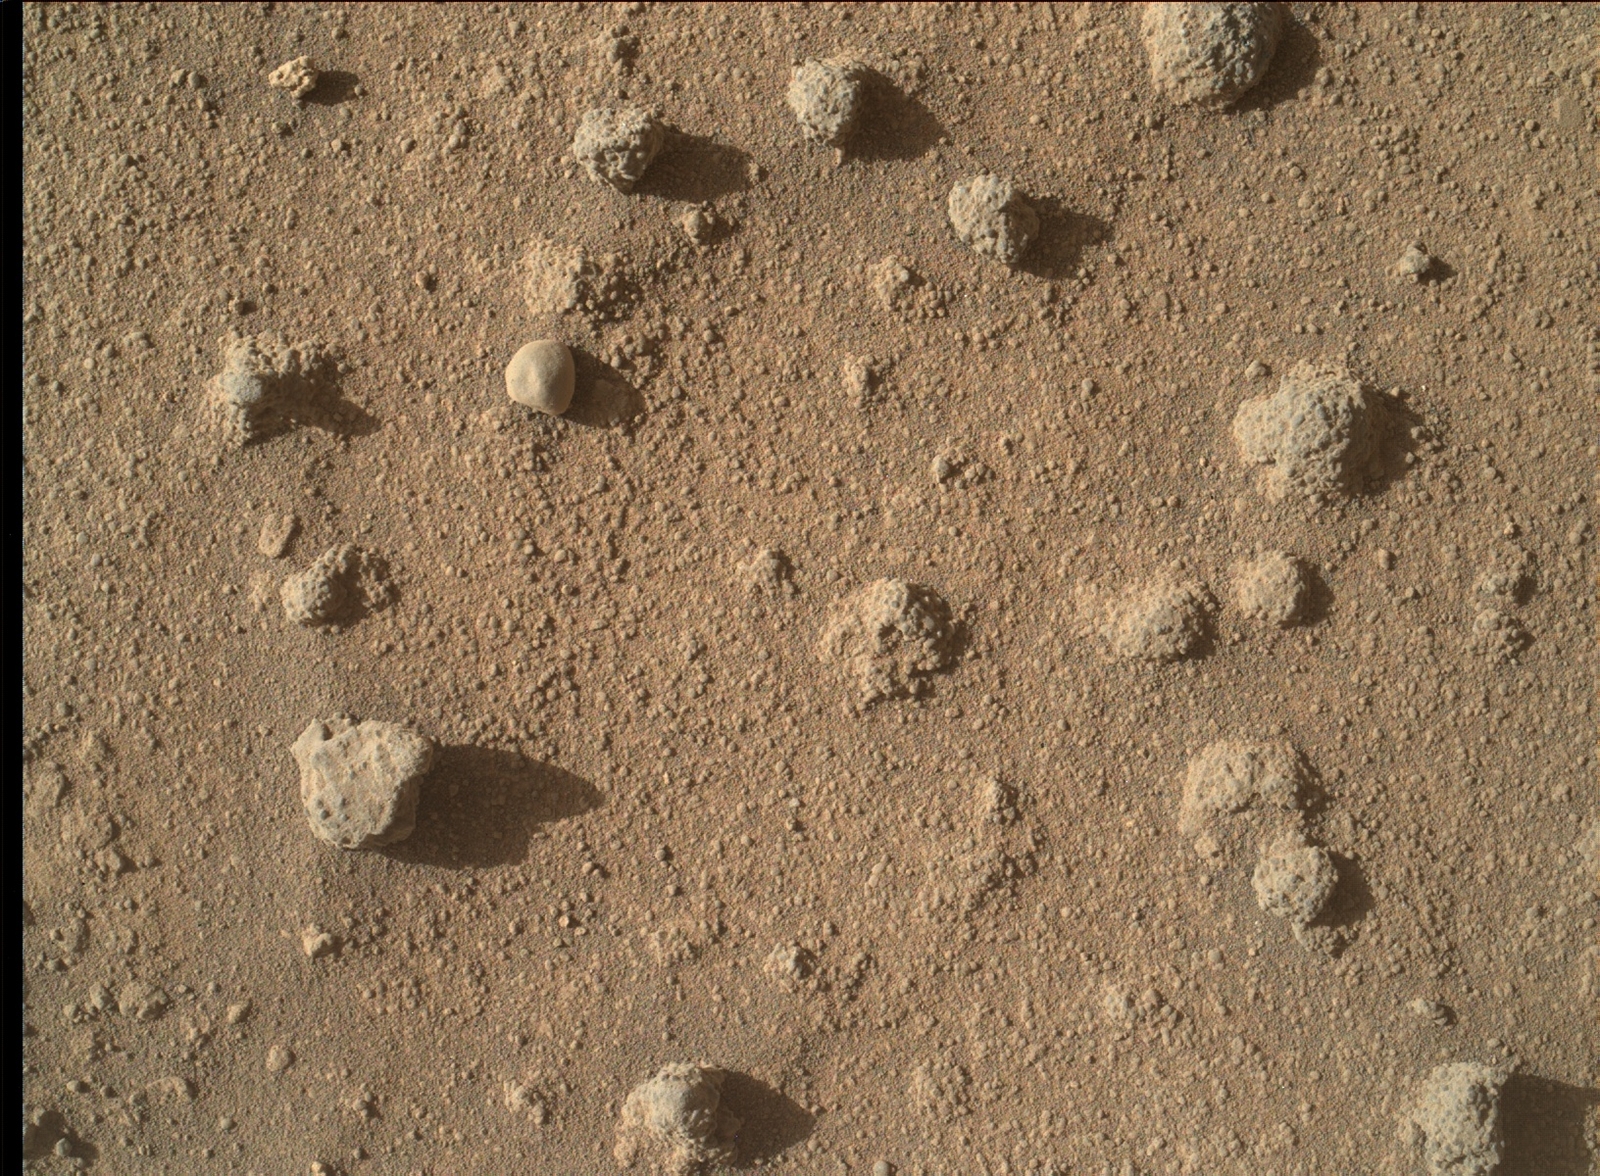 This view shows nodules exposed in sandstone that is part of the Stimson geological unit on Mount Sharp, Mars.  The nodules can be seen to consist of grains of sand cemented together.